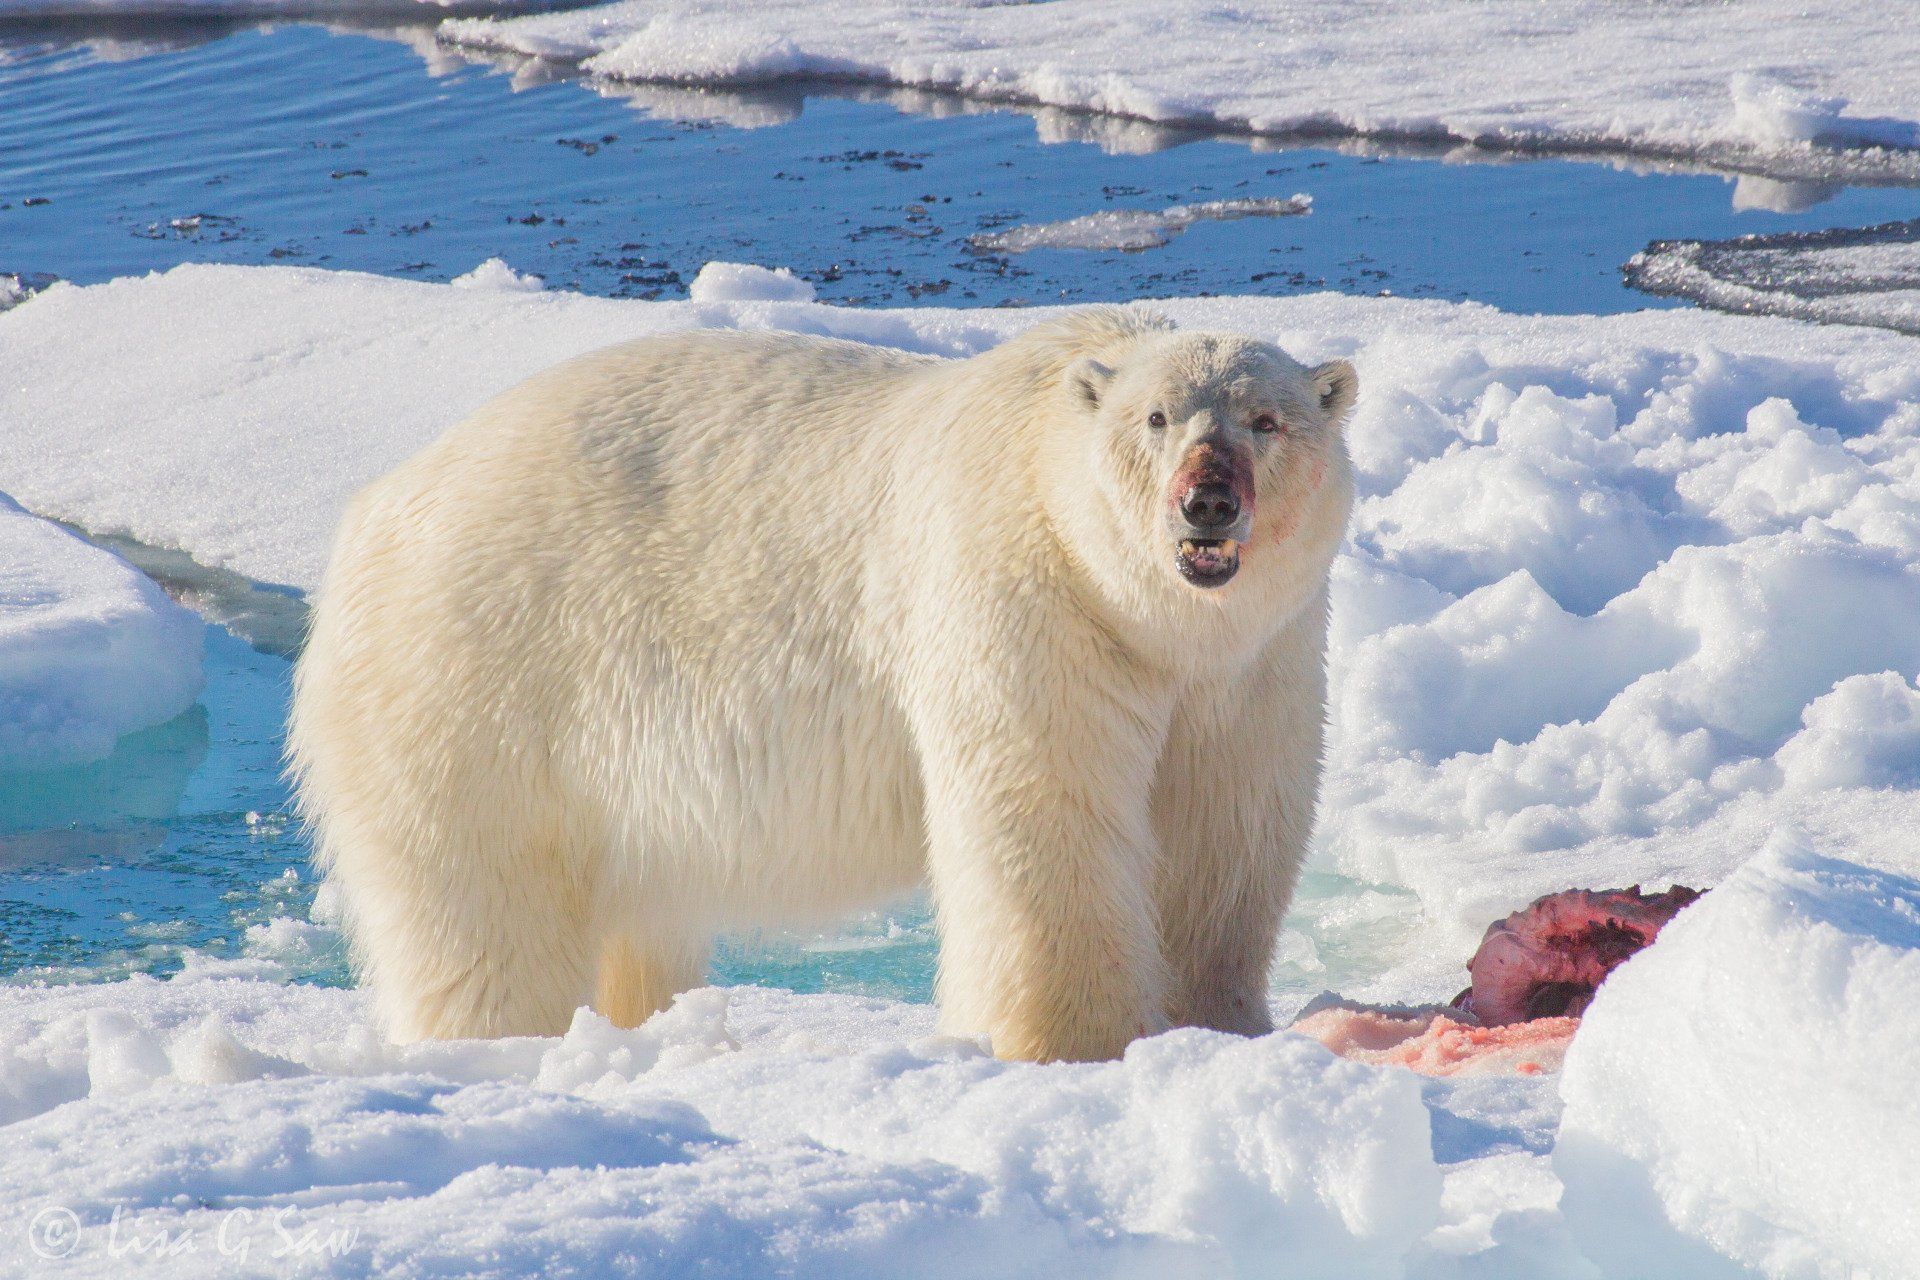 Polar Bear with blood on face from eating